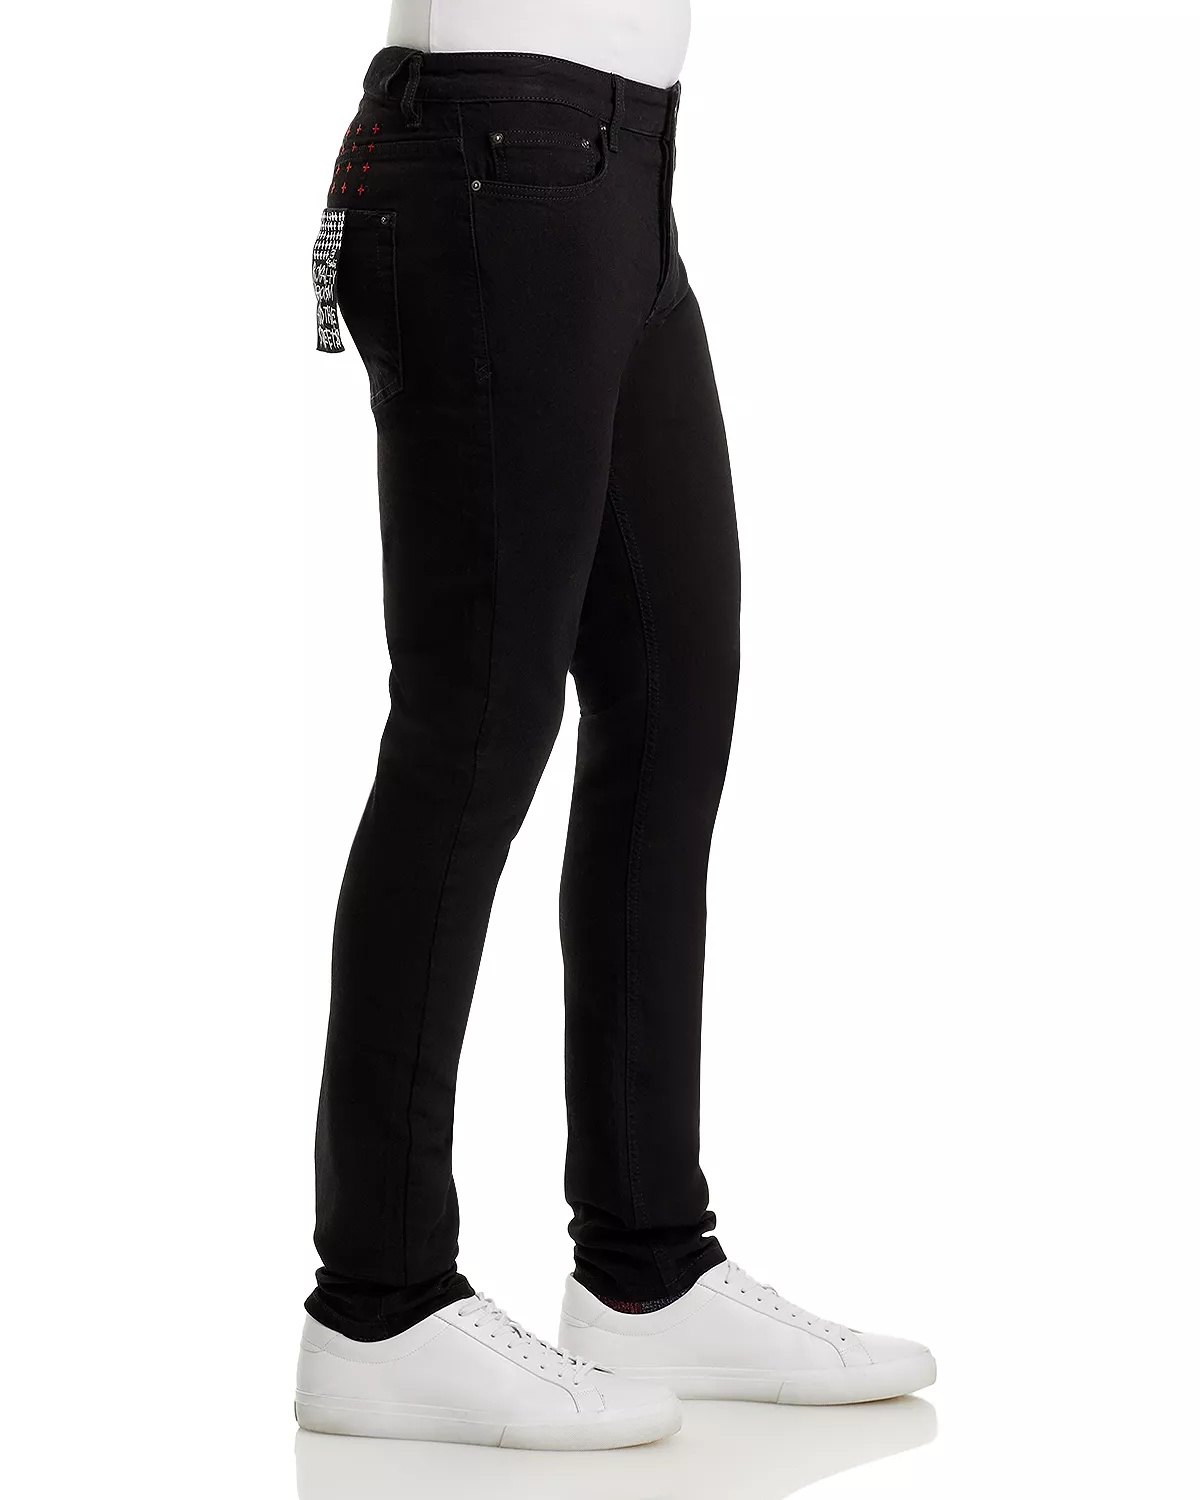 Chitch Slim Fit Jeans in Laid Black - 5